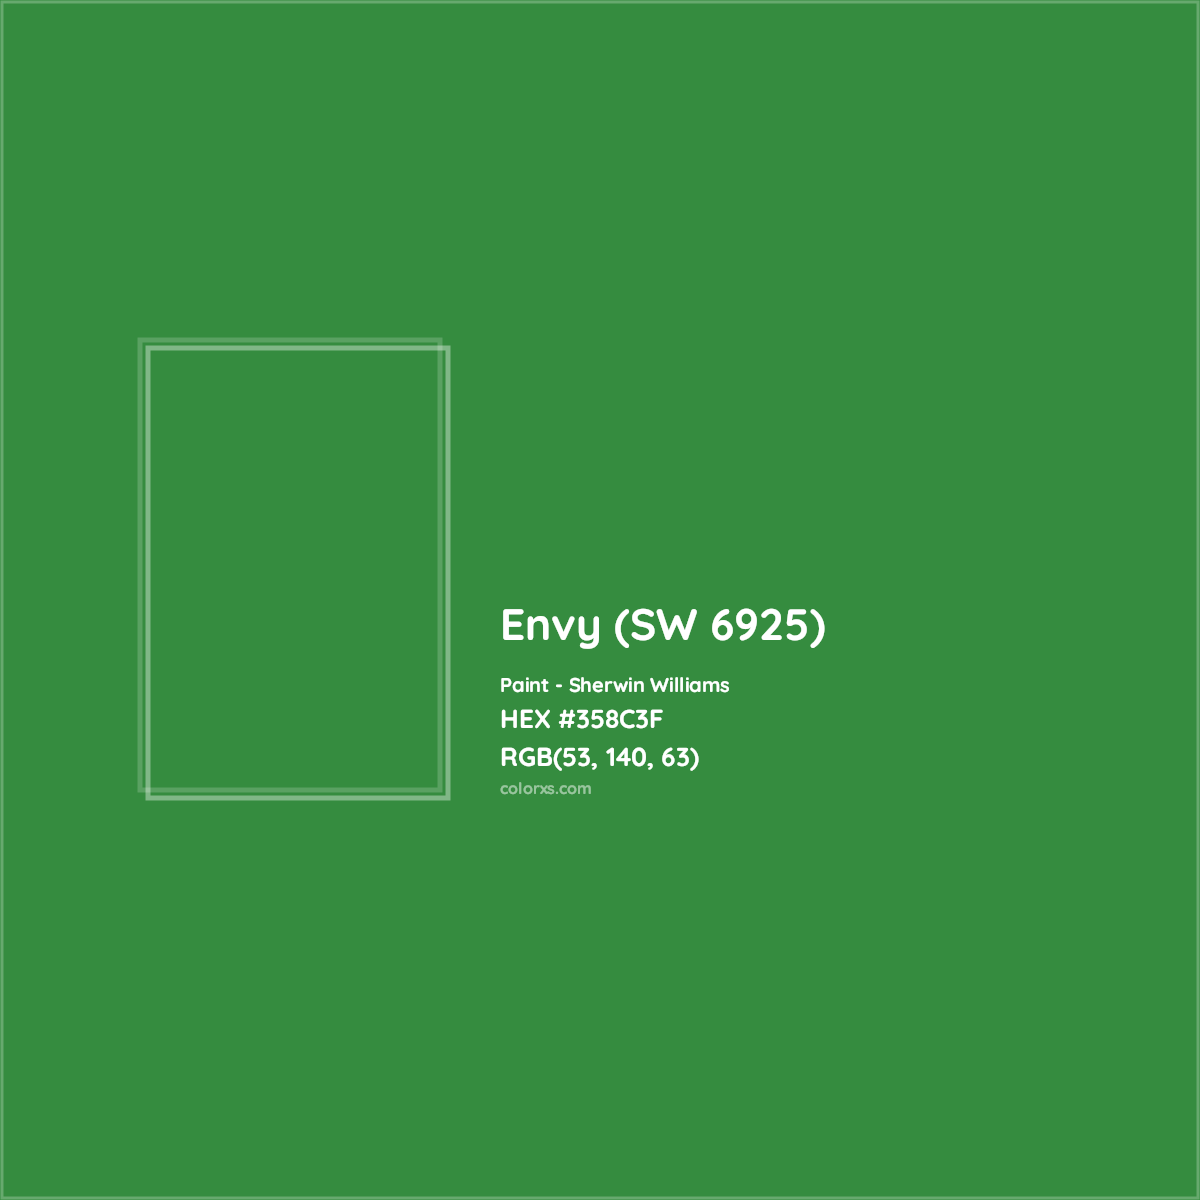 HEX #358C3F Envy (SW 6925) Paint Sherwin Williams - Color Code